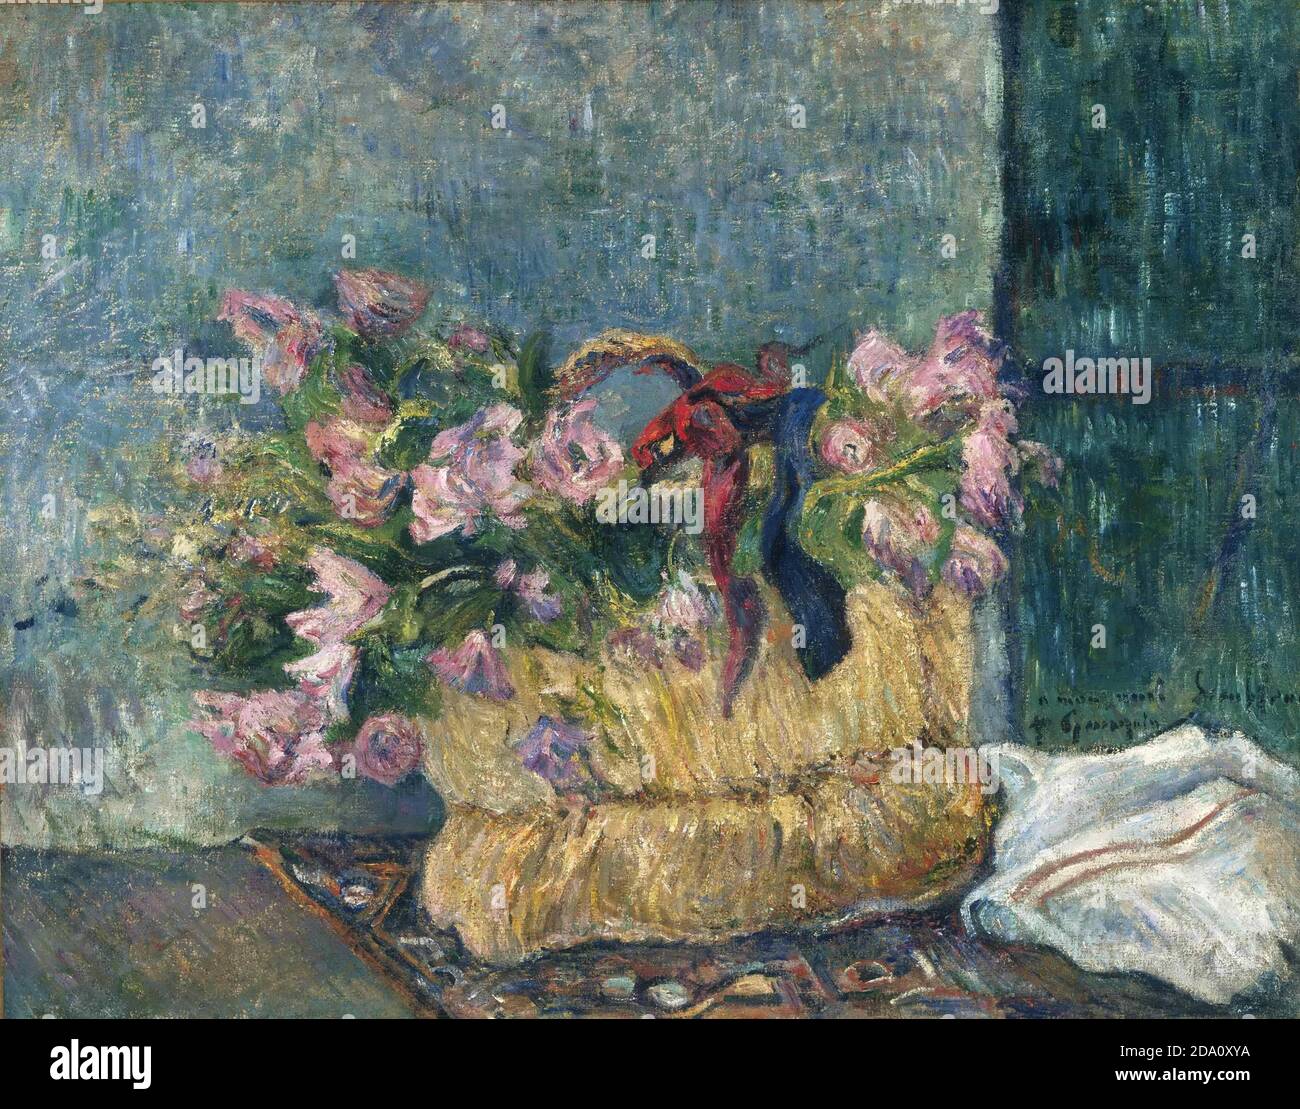 Paul Gauguin, French, 1848-1903 – Still Life with Moss Roses in a Basket  1886 Stock Photo - Alamy